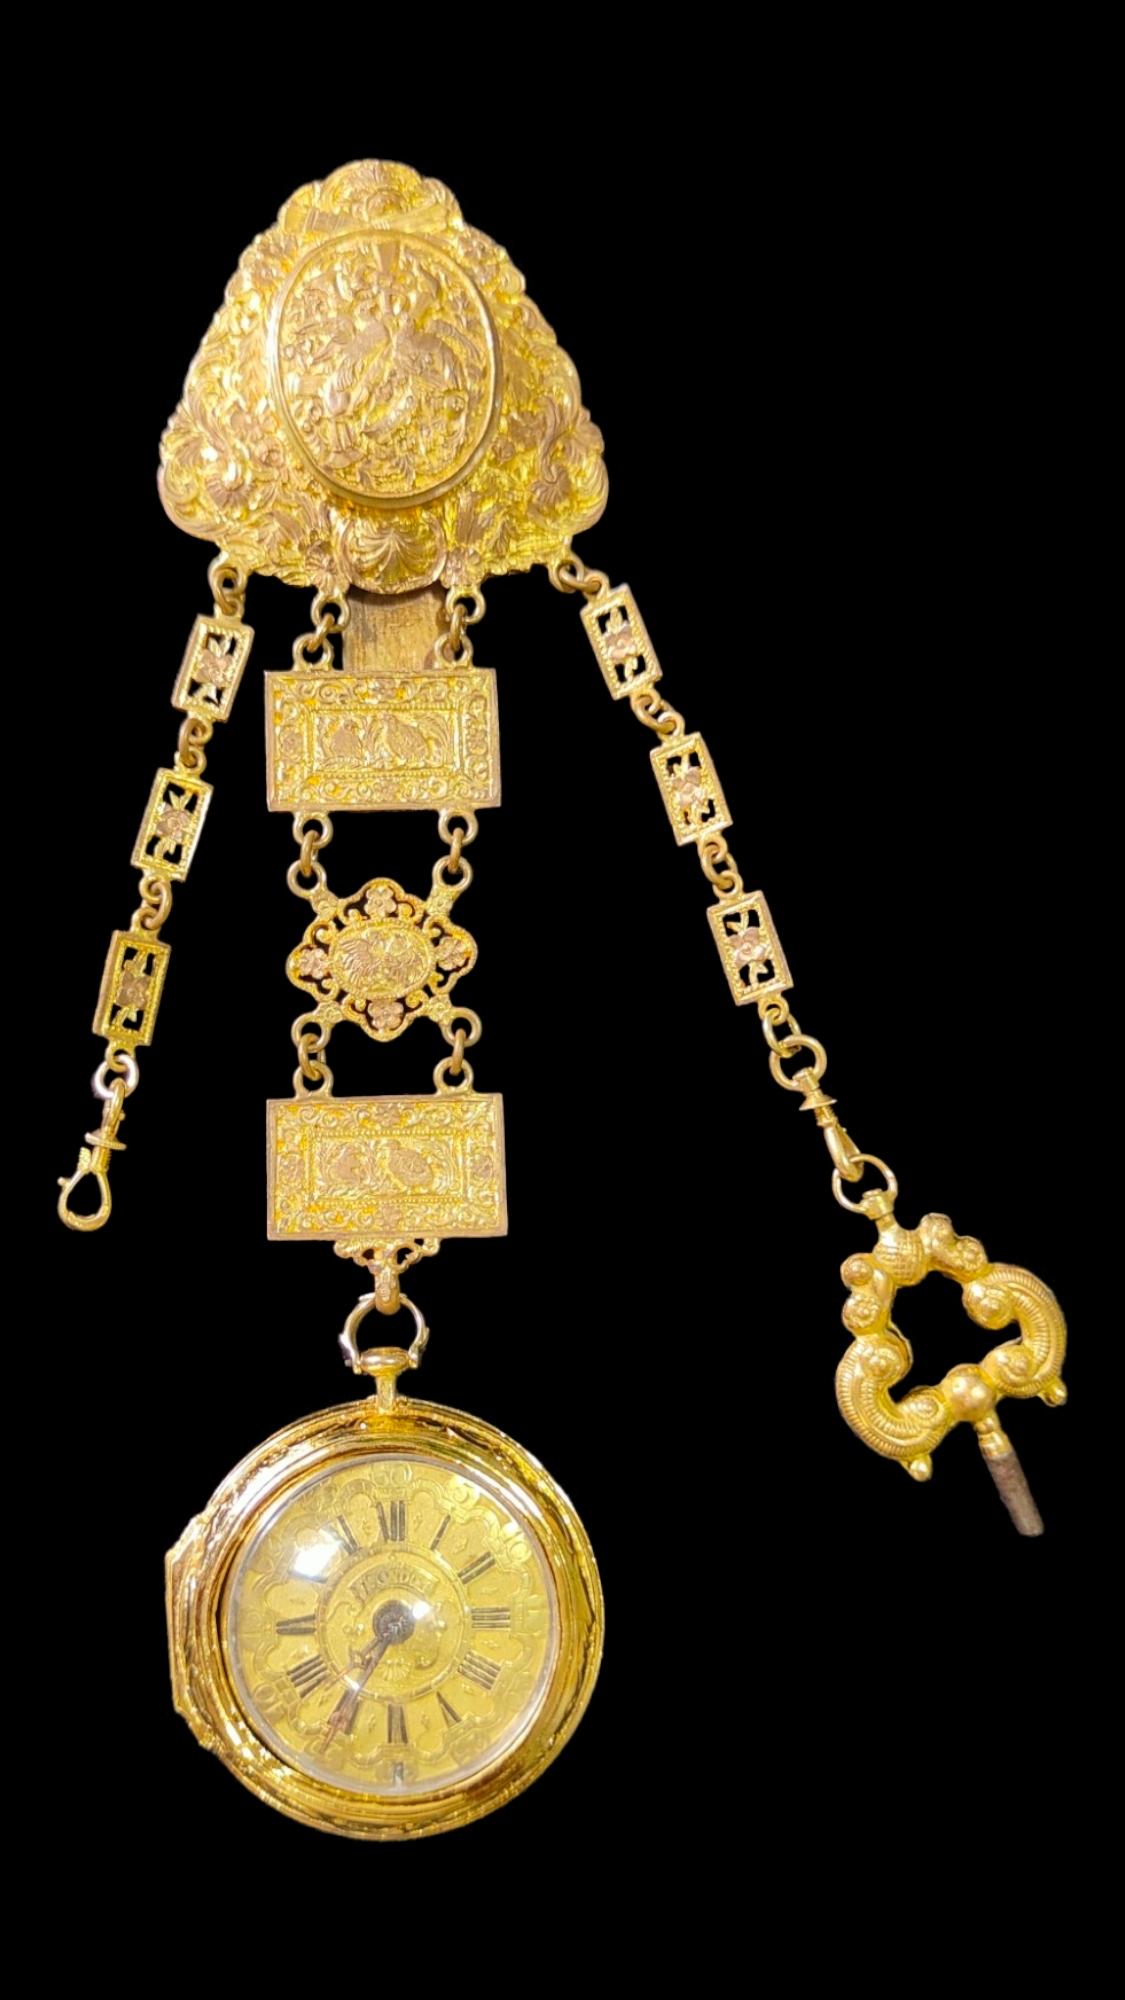 17th Century German Pocket Watch In 18k Gold For Sale 10